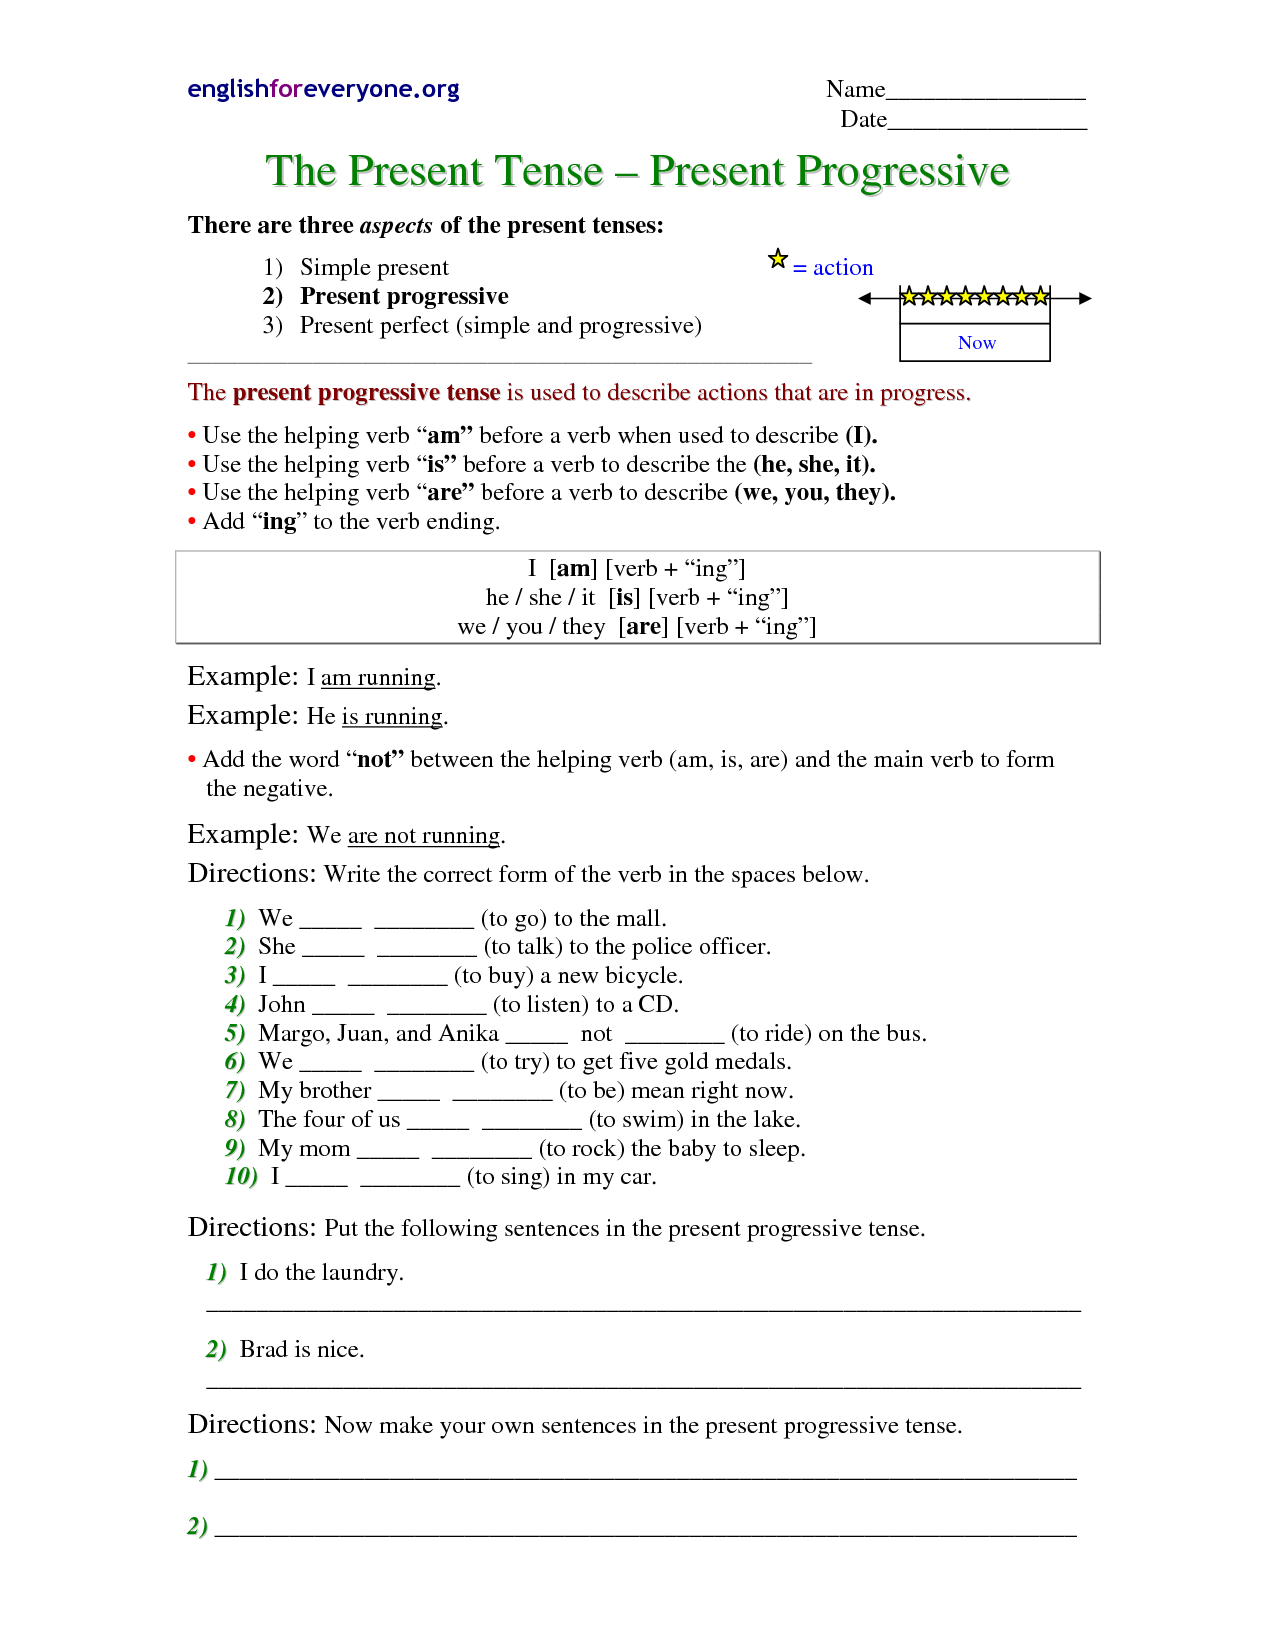 19-best-images-of-future-progressive-worksheets-future-with-present-continuous-worksheet